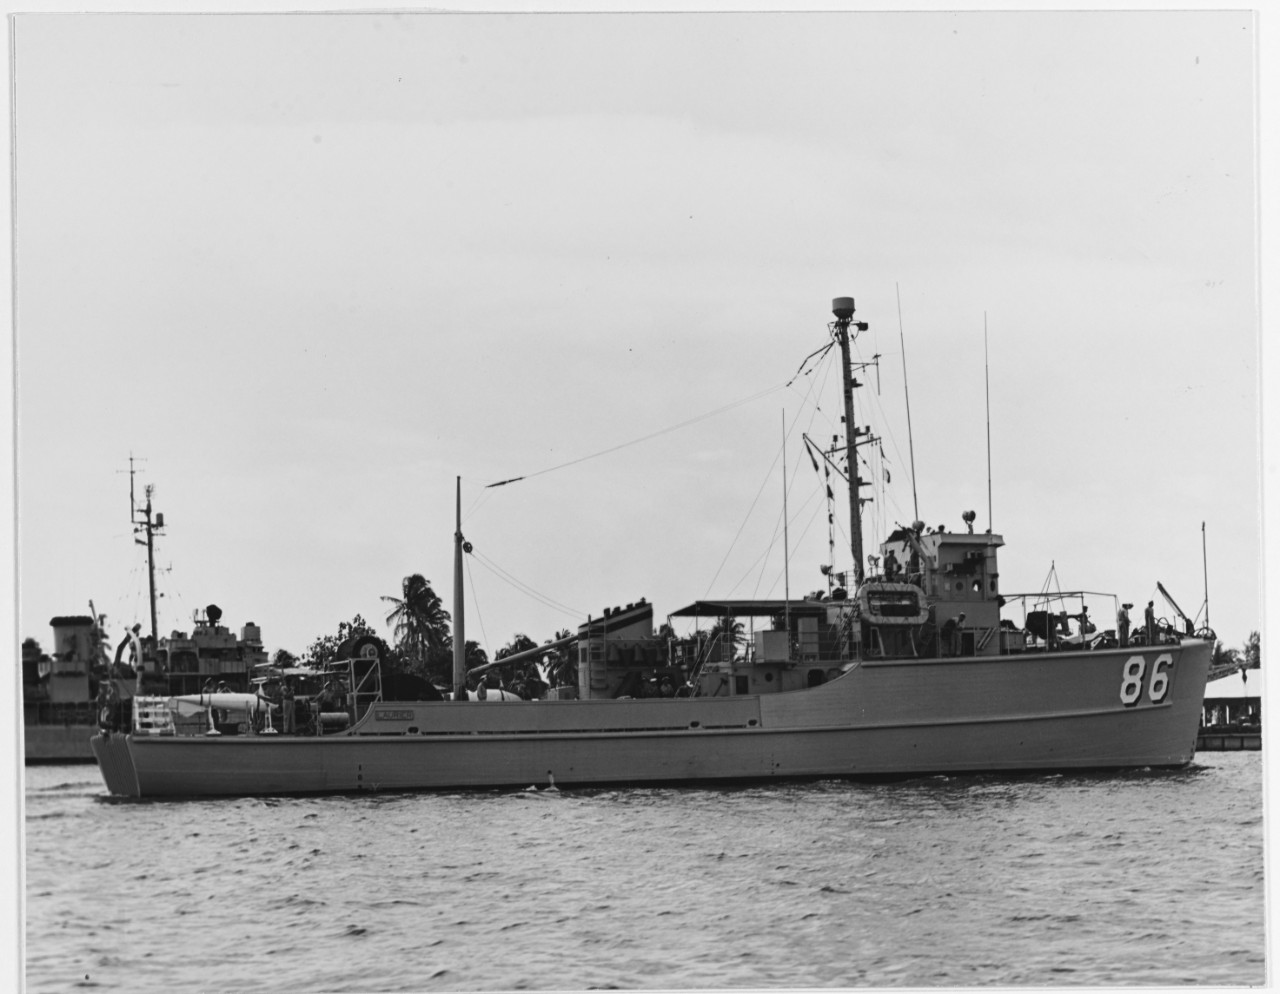 LAURIER (French Coastal Minesweeper, 1953). 